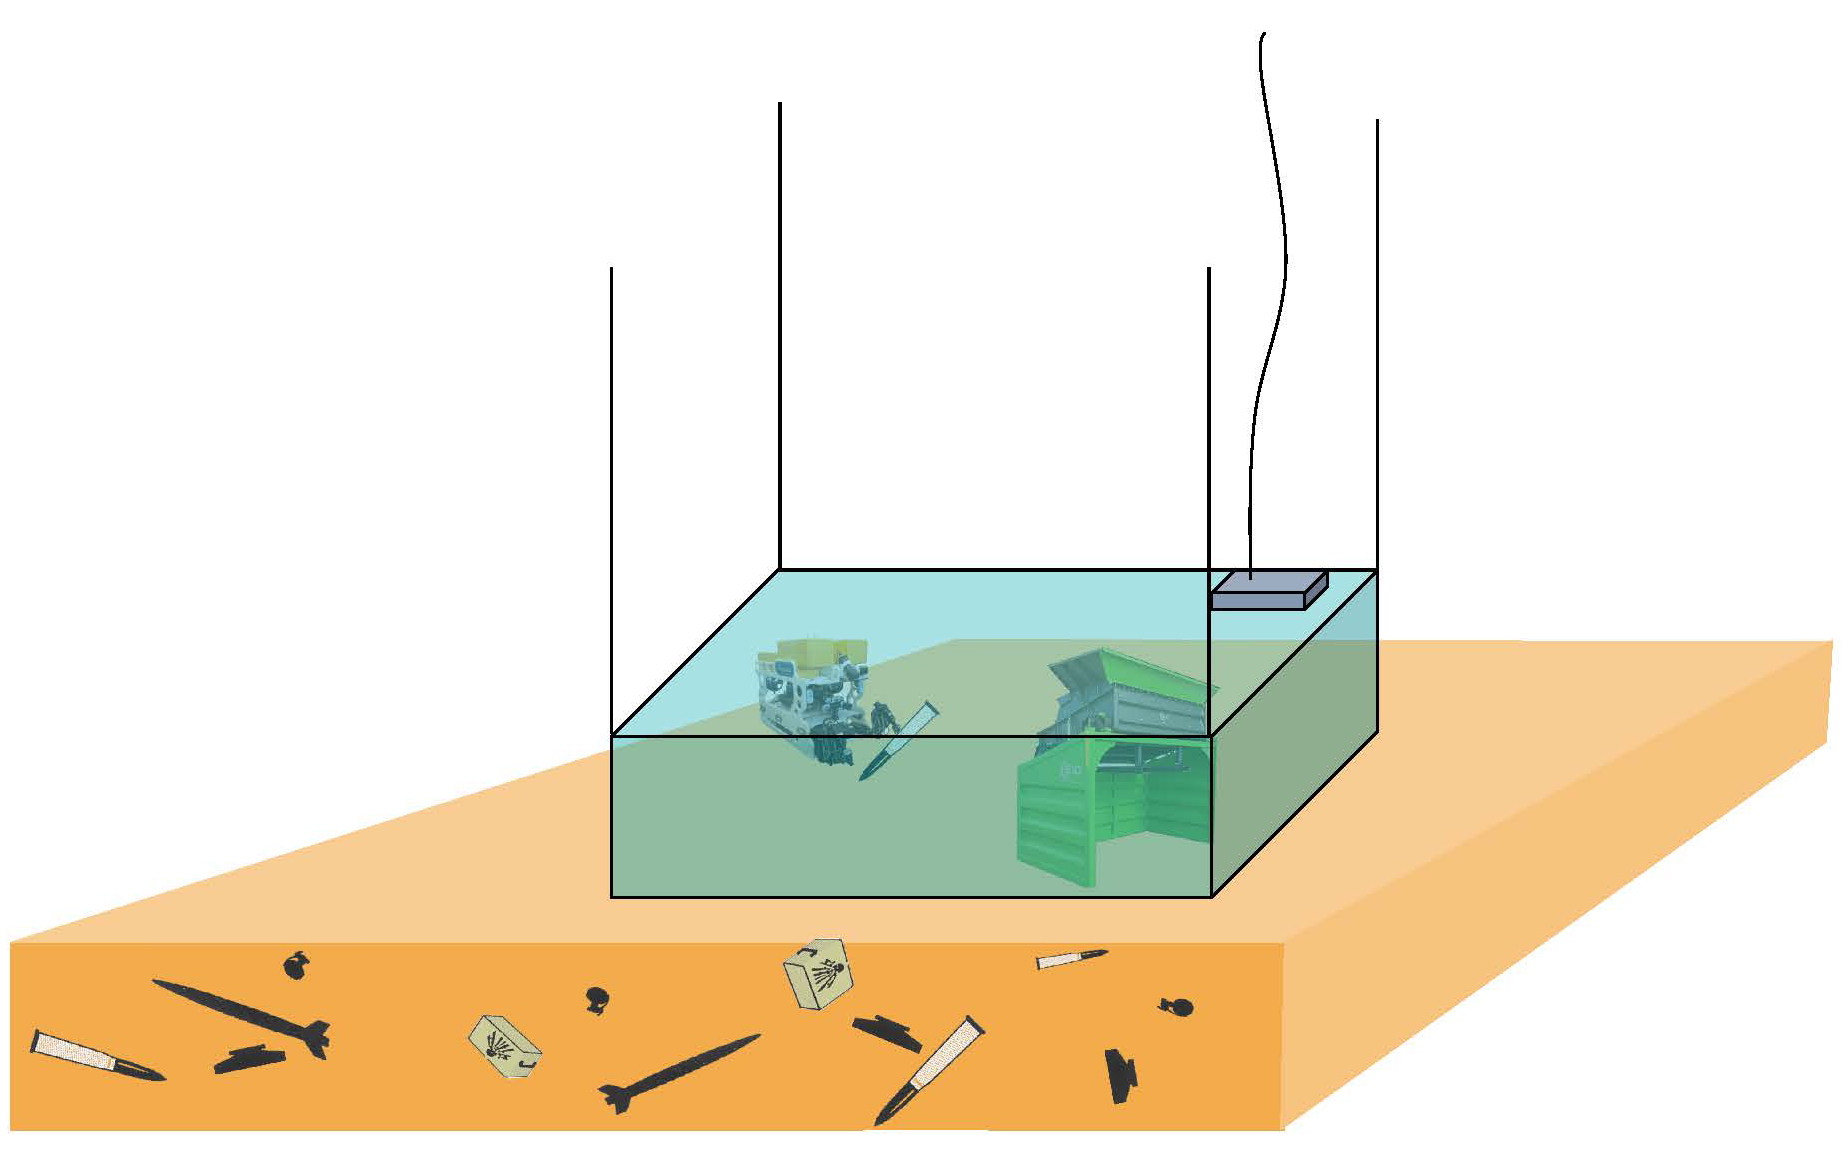 A possible illustration of ammunition recovery using a mobile sediment box